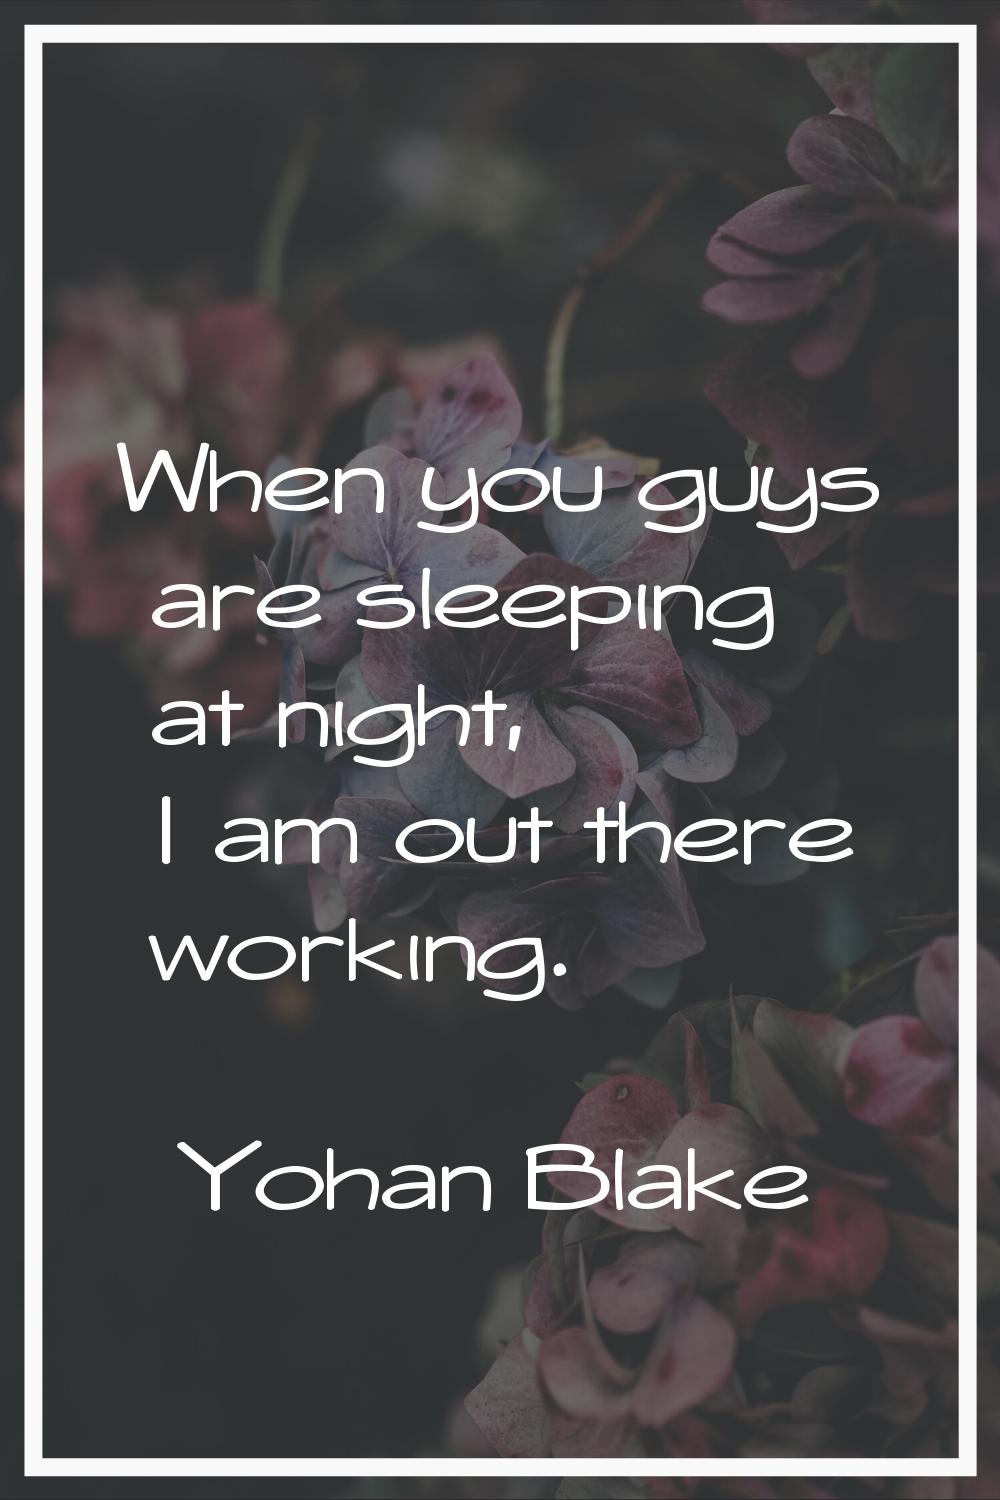 When you guys are sleeping at night, I am out there working.